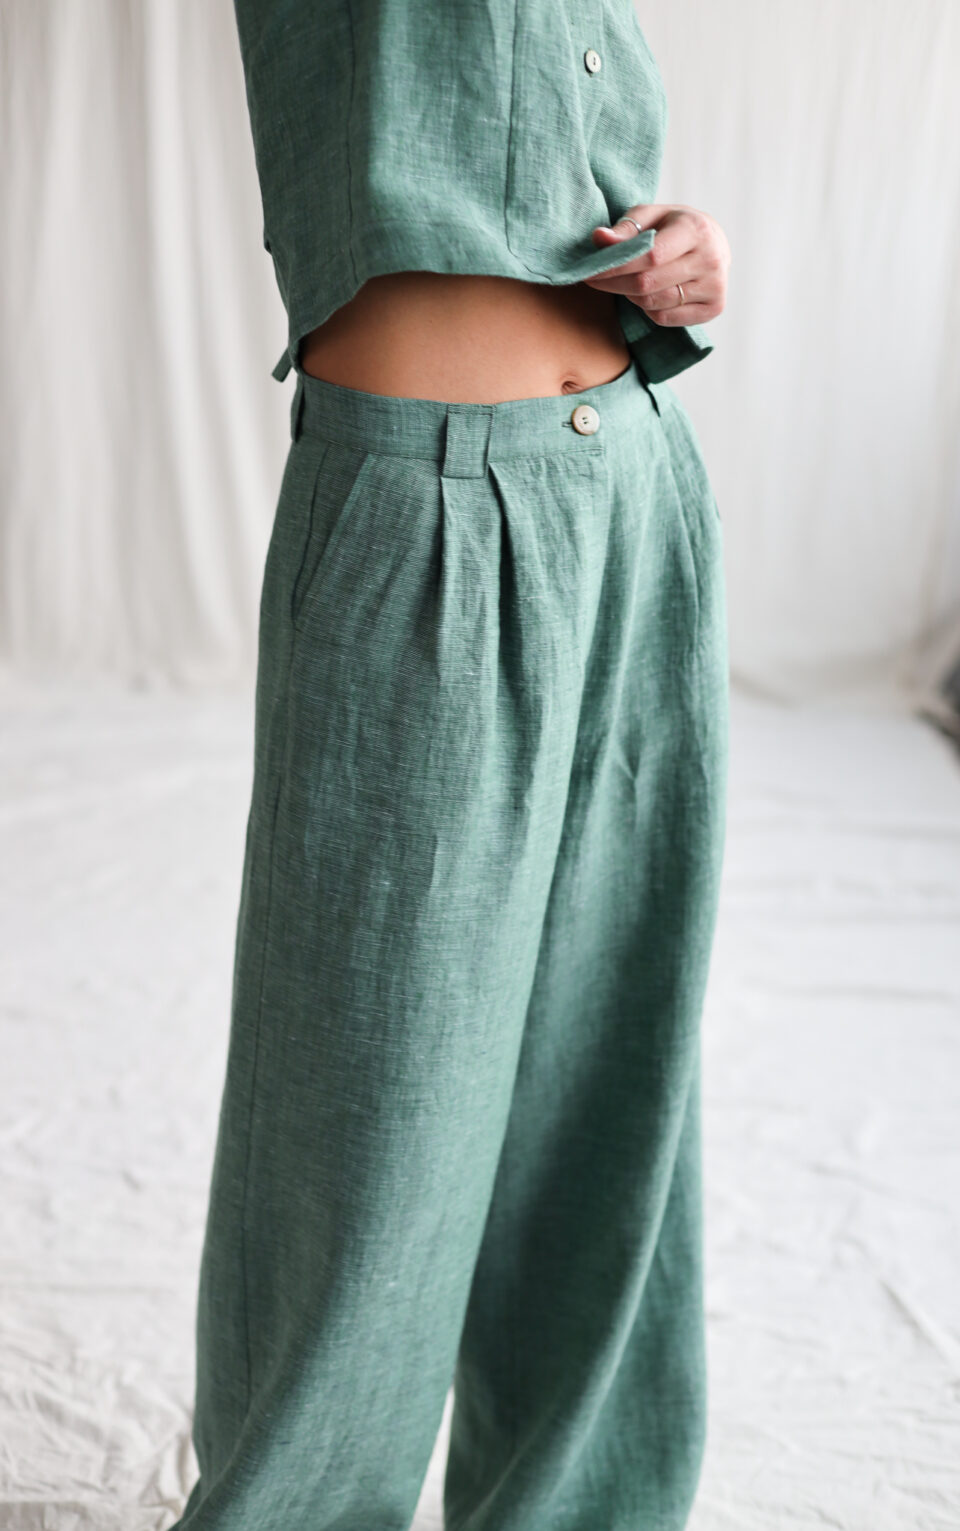 Pleated linen palazzo trousers | Pants | Sustainable clothing | OffOn clothing